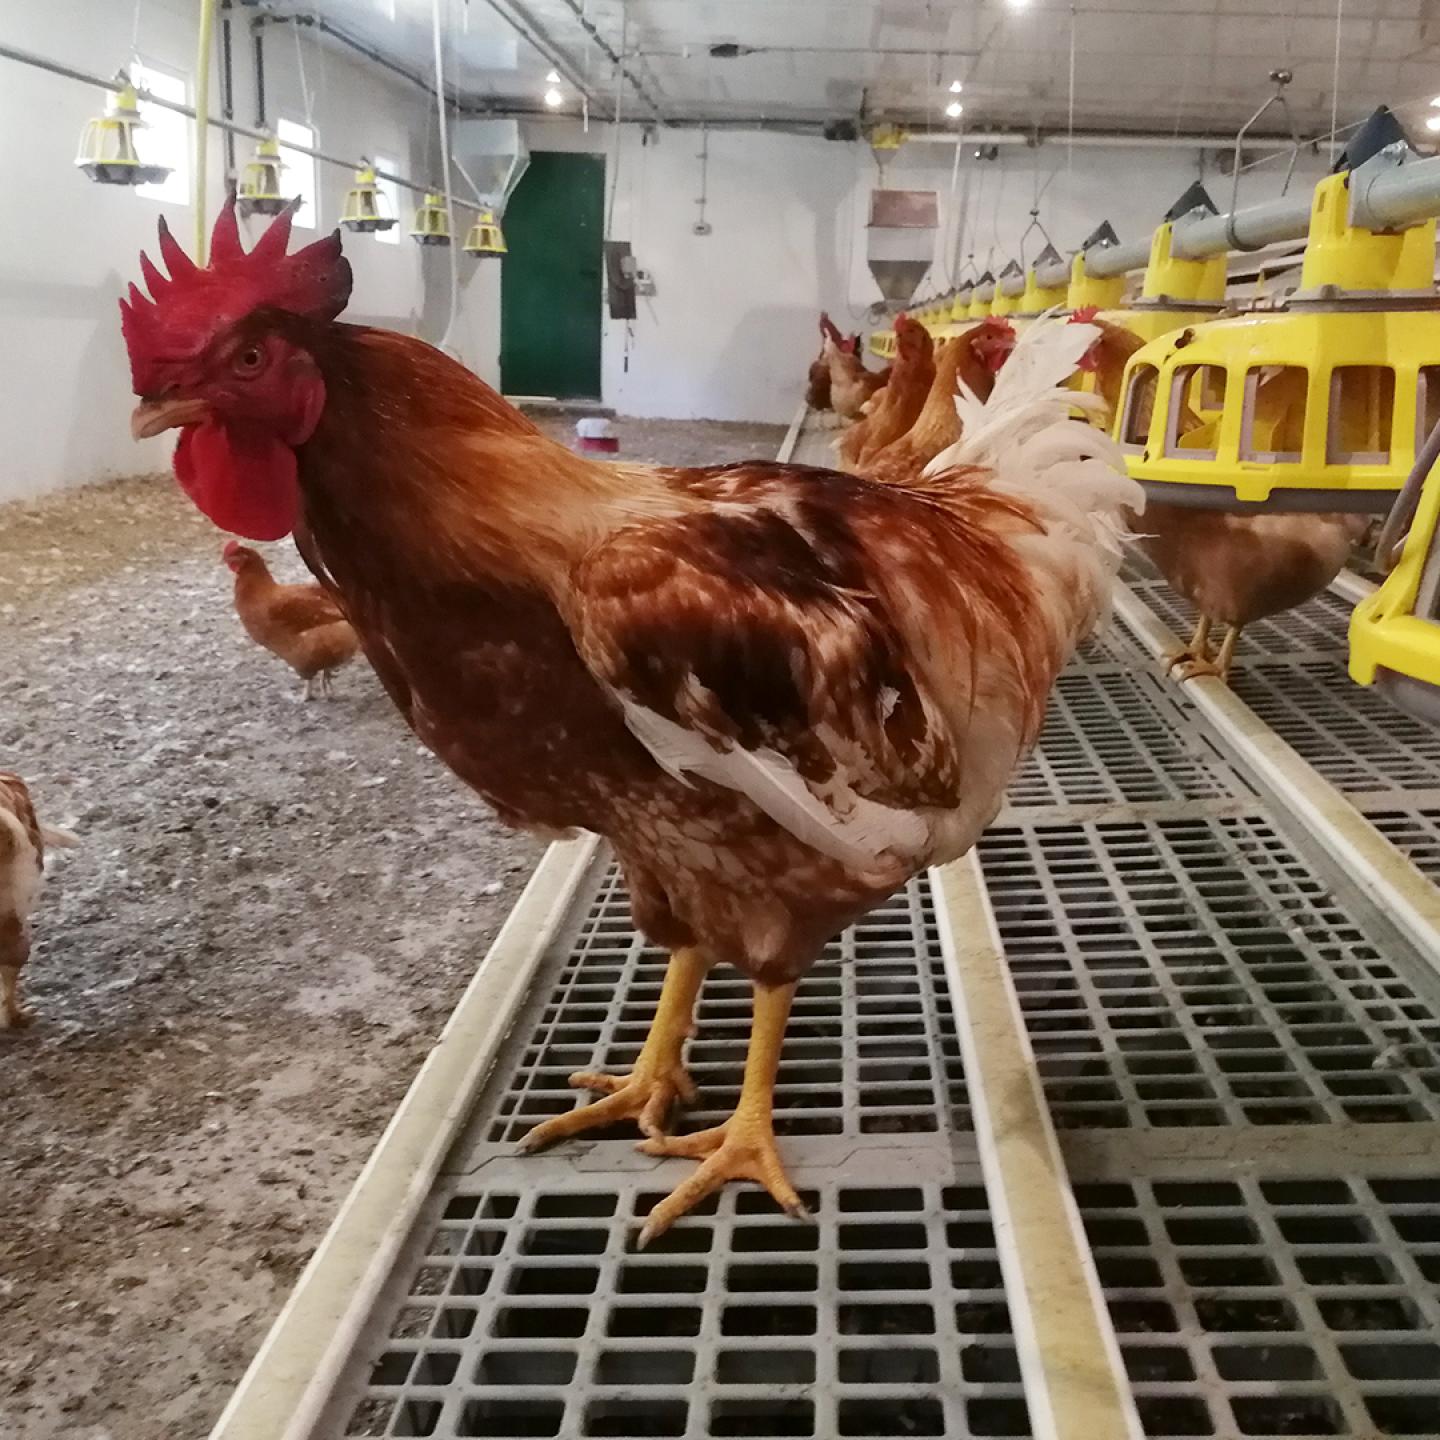 poultry equipment for broiler breeder slow growing, a market trend